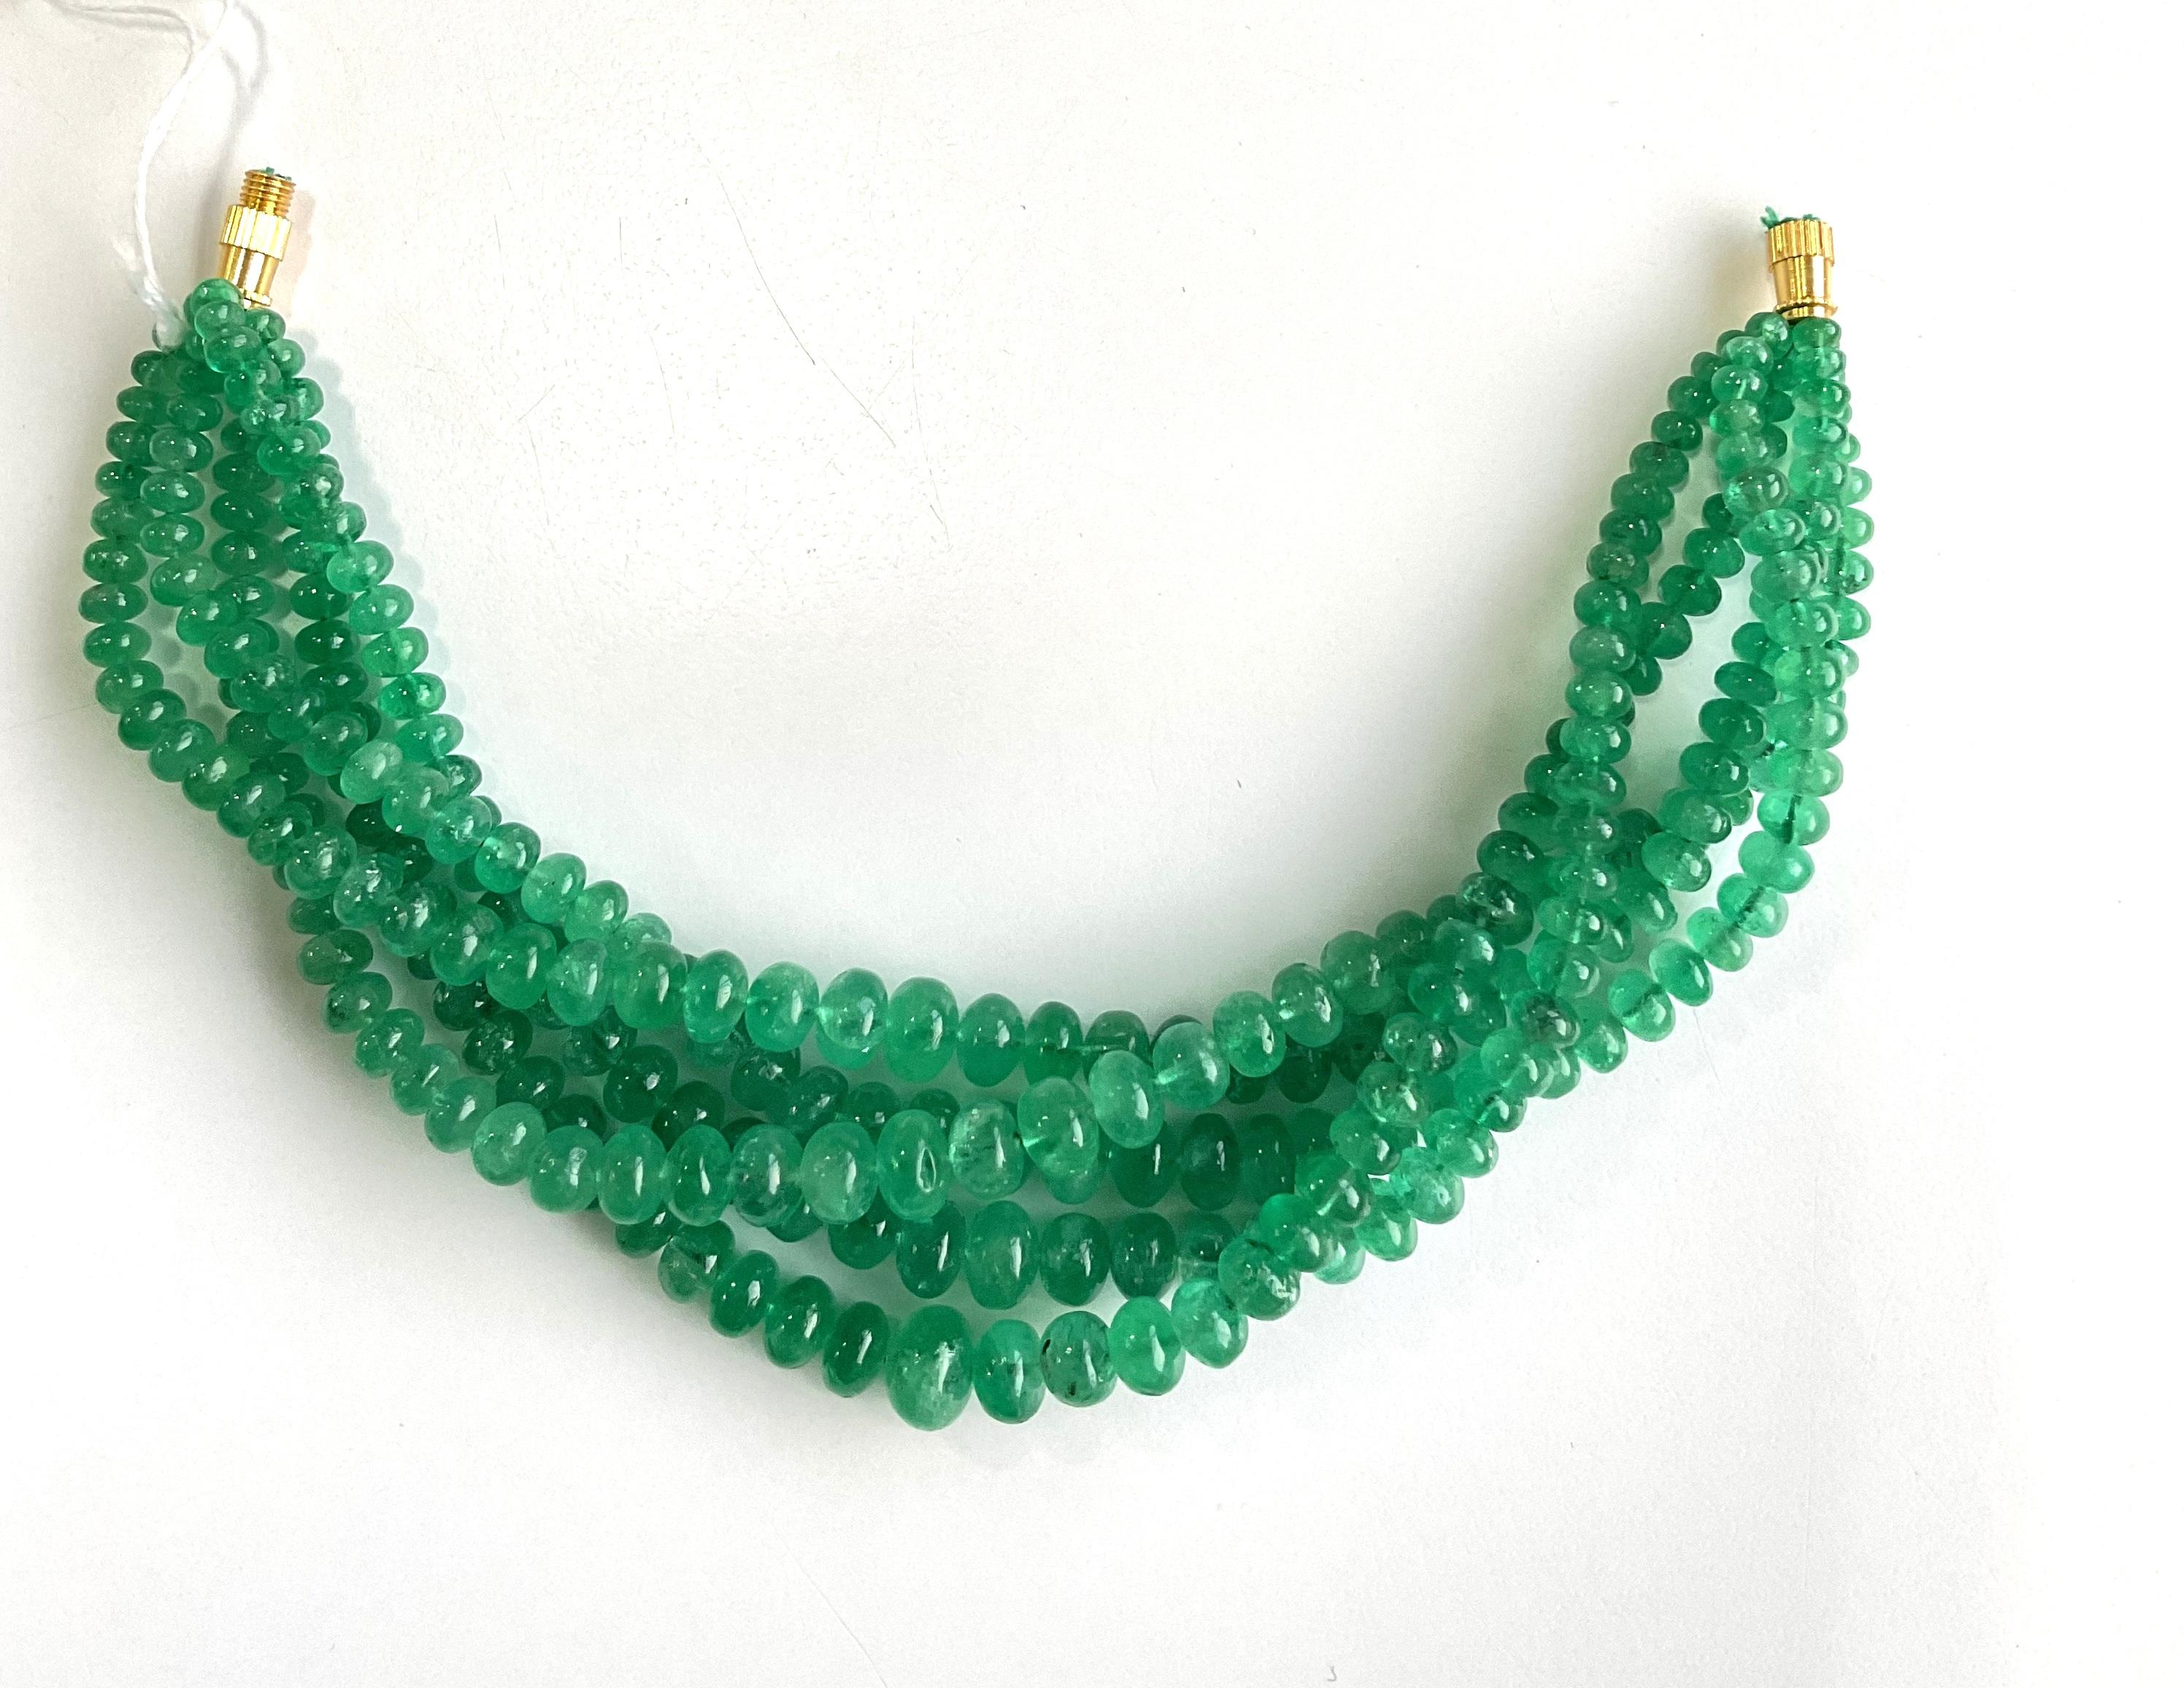 Colombian Emerald Beads For Jewelry Natural Gems
Gemstone - Emerald
Weight - 186.90 carats
Shape - Beads
Size - 4 To 8 MM
Quantity - 5 line